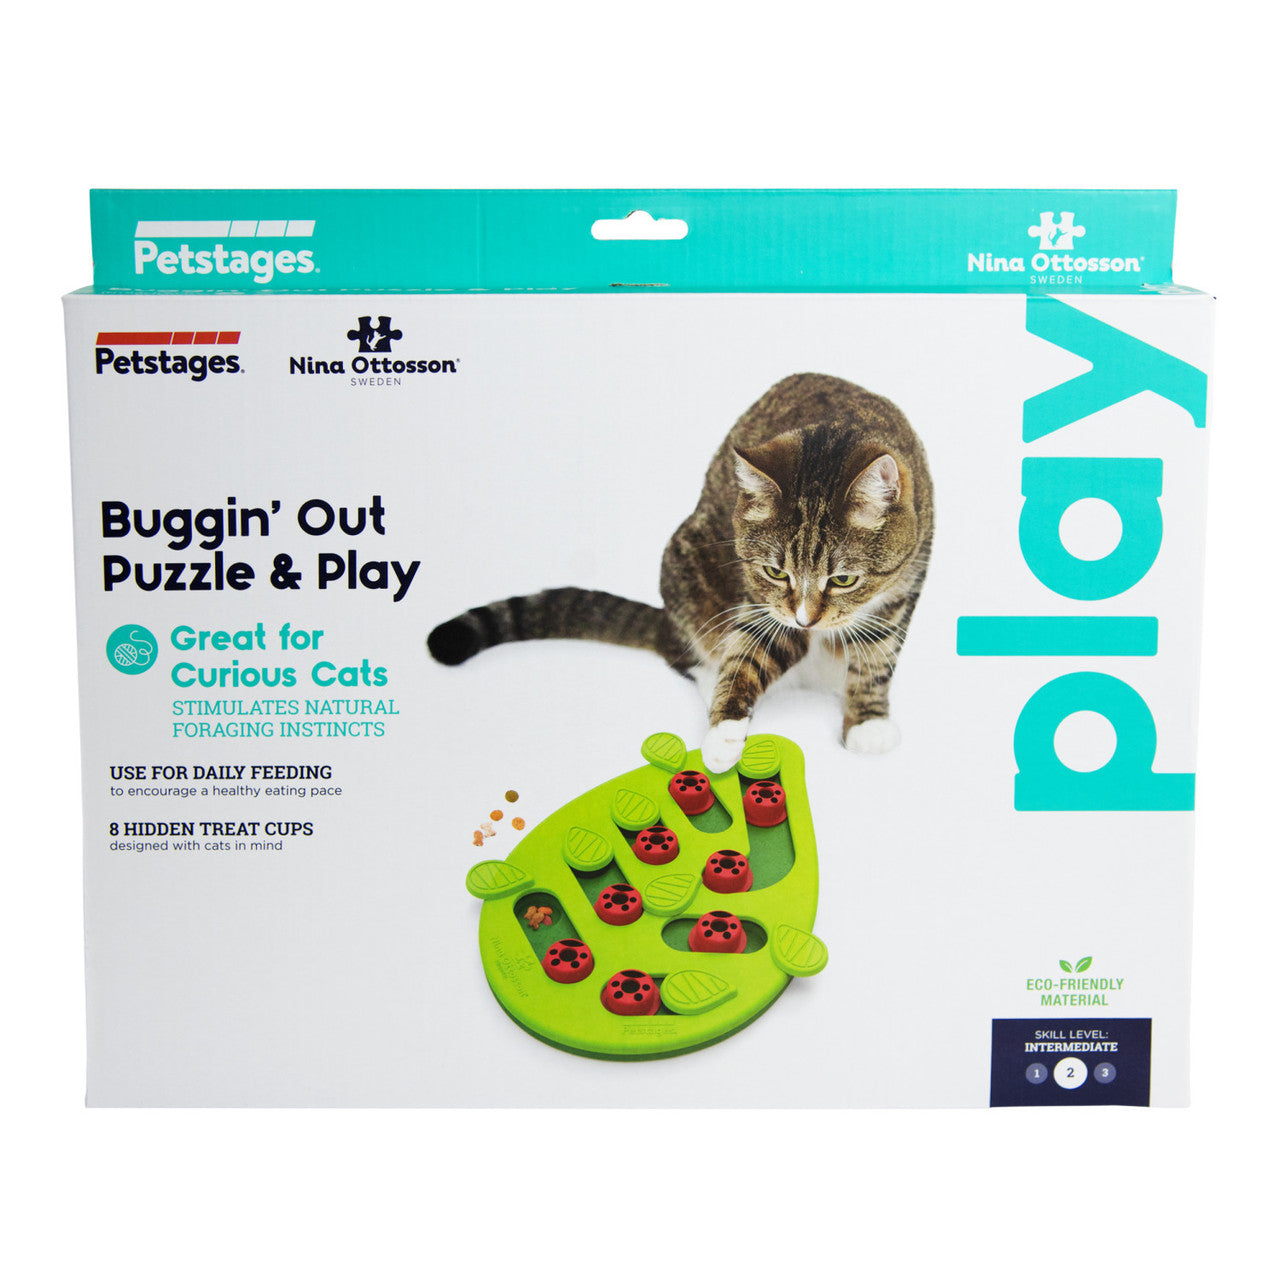 Buggin' Out Puzzle & Play Cat Game